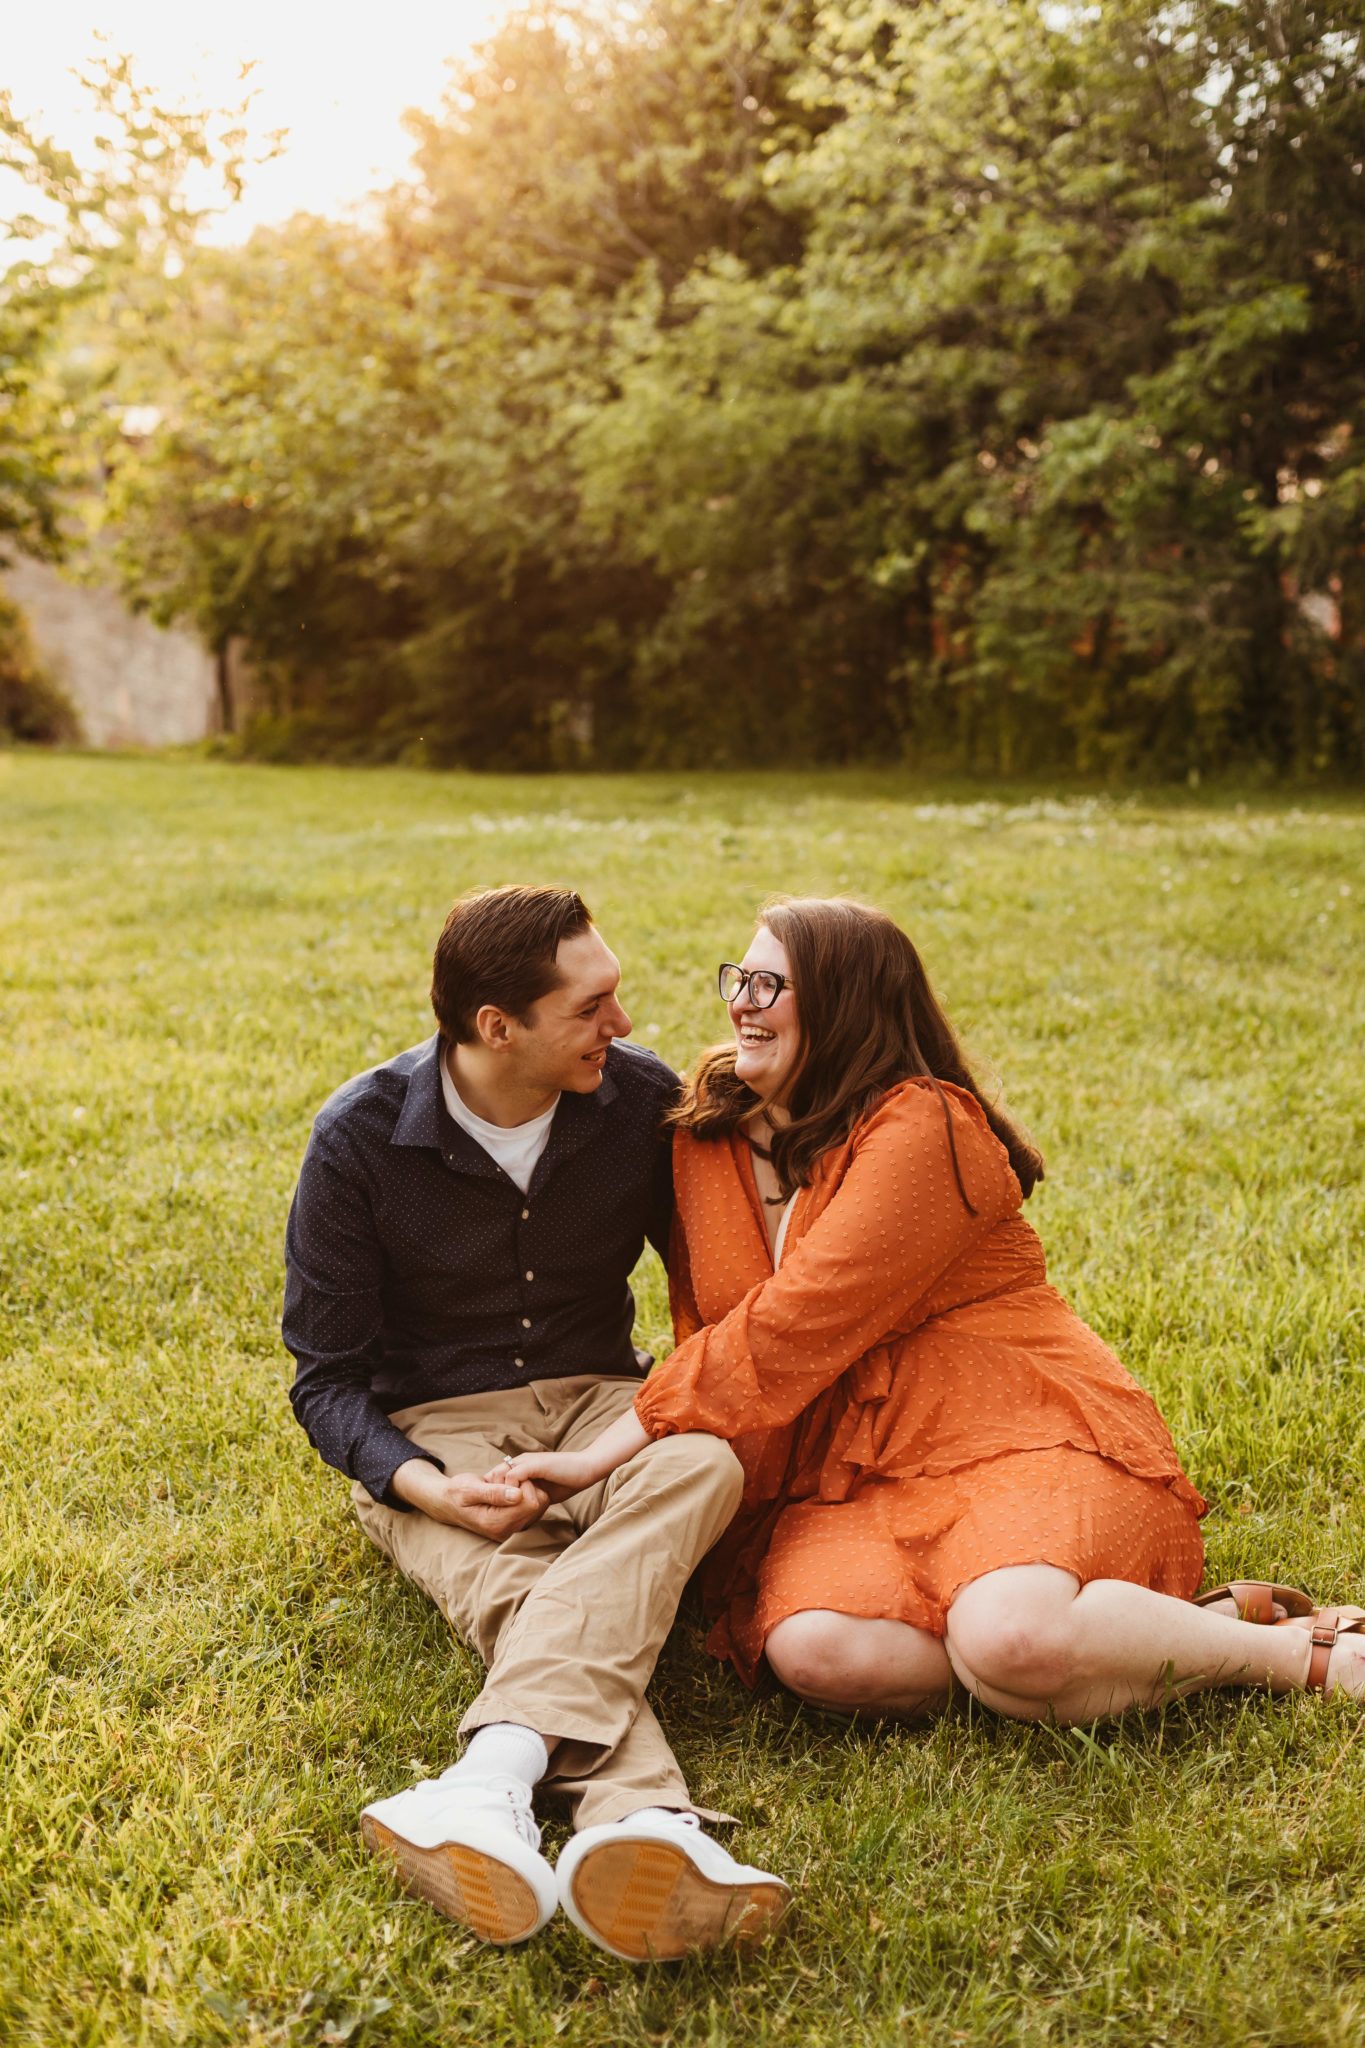 A Guide to Hudson Valley Engagement Locations - alexhealyphoto.com